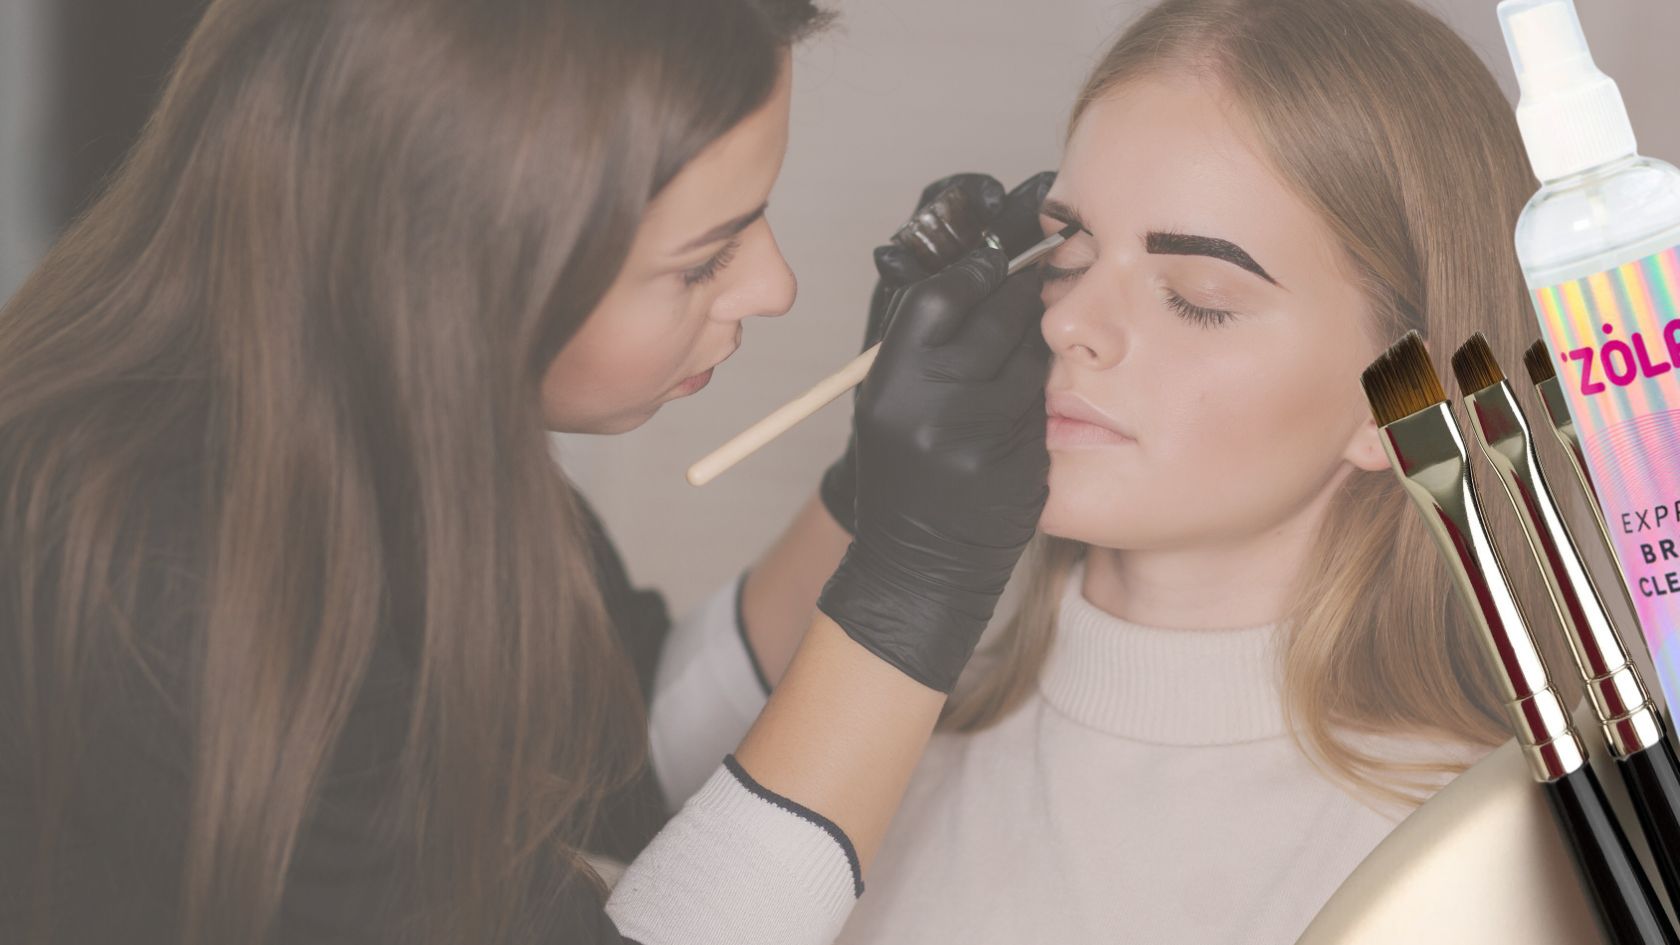 Effective methods of brush care by a professional eyebrow stylist: tips and techniques